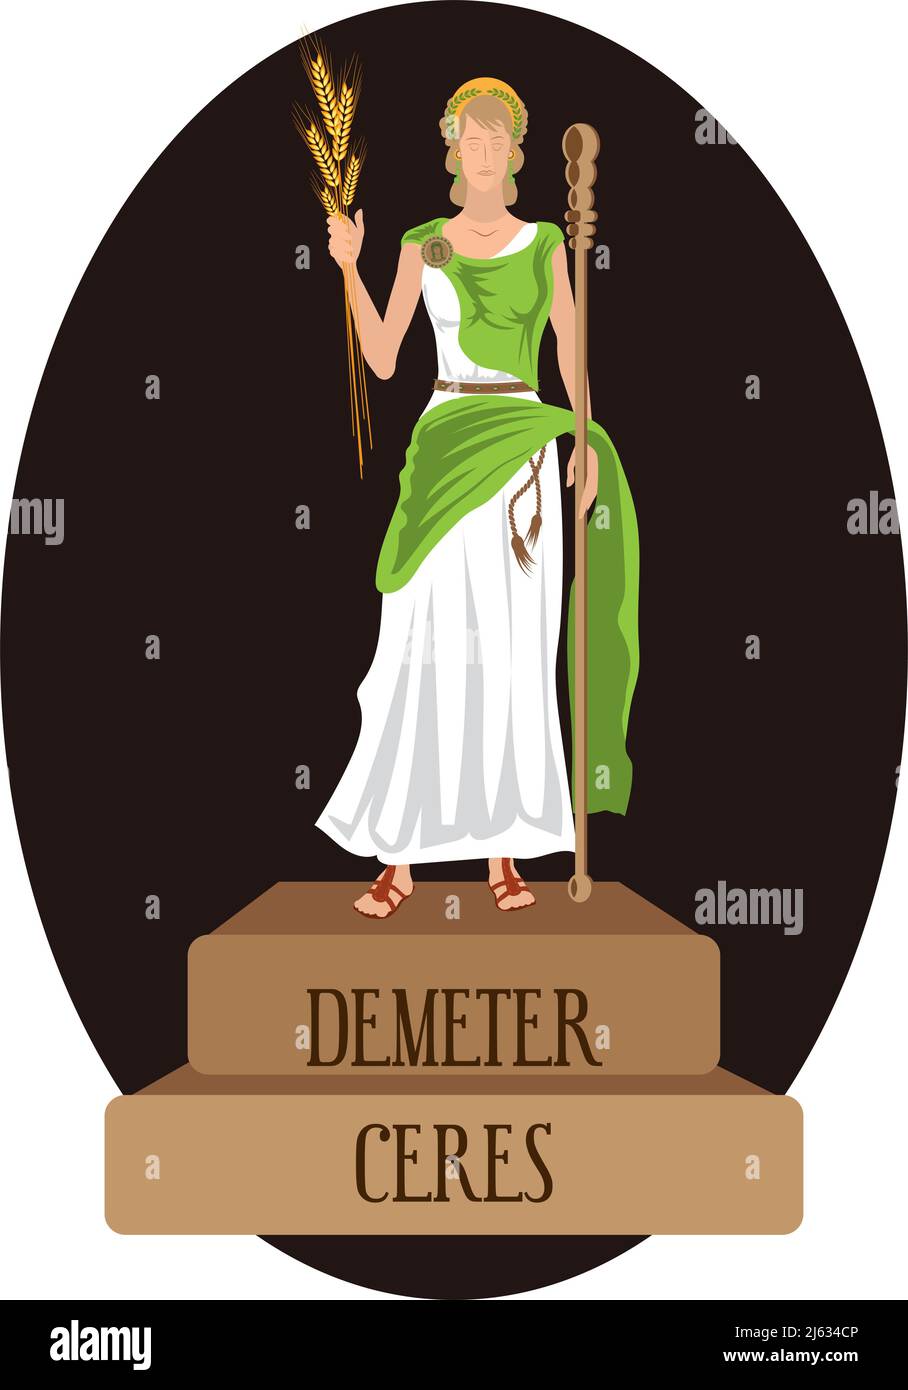 Illustration vector isolated of Roman and Greek gods, Demeter, Ceres Stock Vector